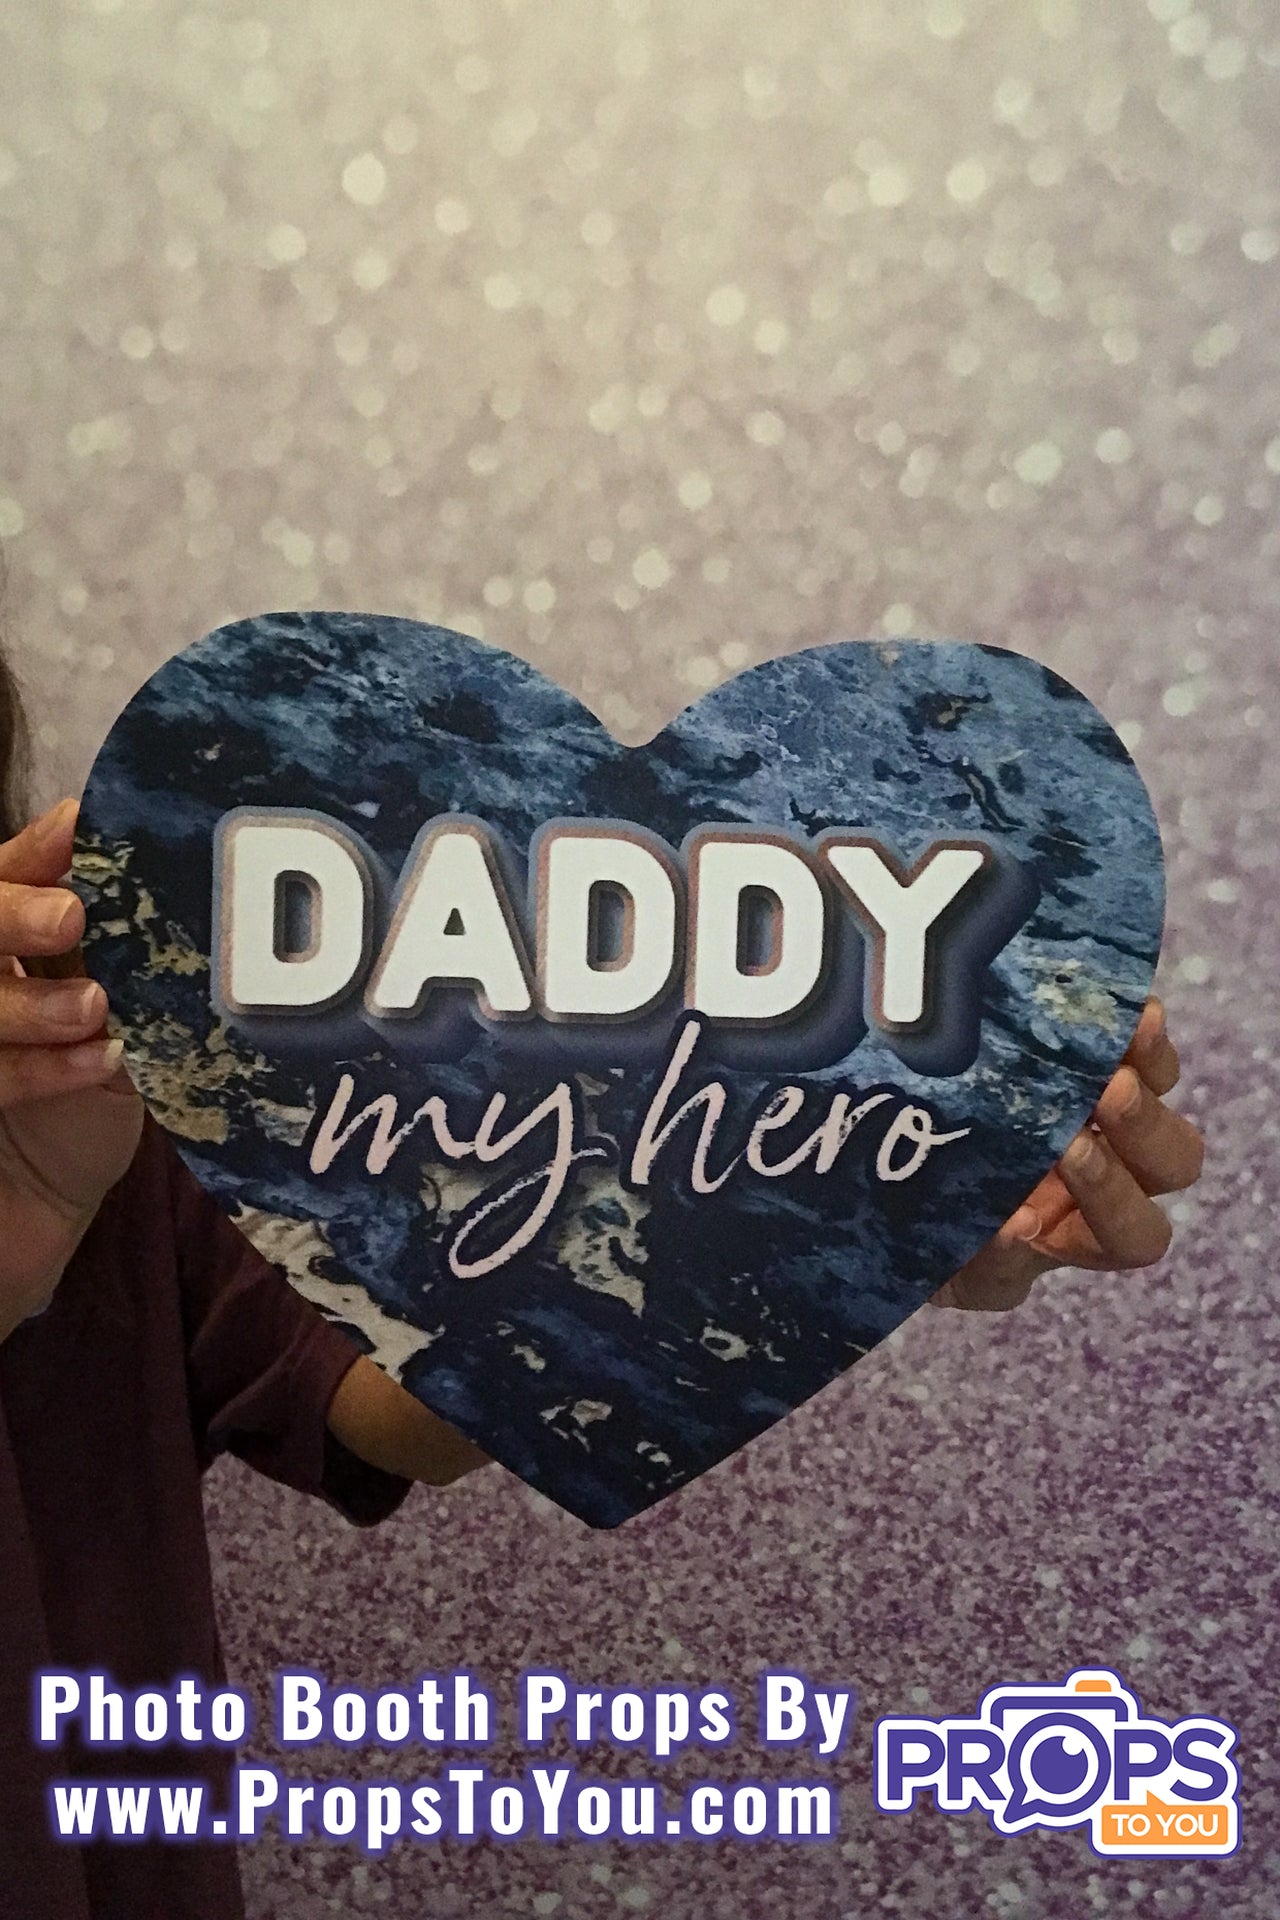 BUNDLE! Daddy Daughter Dance - 5 Double-Sided Photo Booth Props